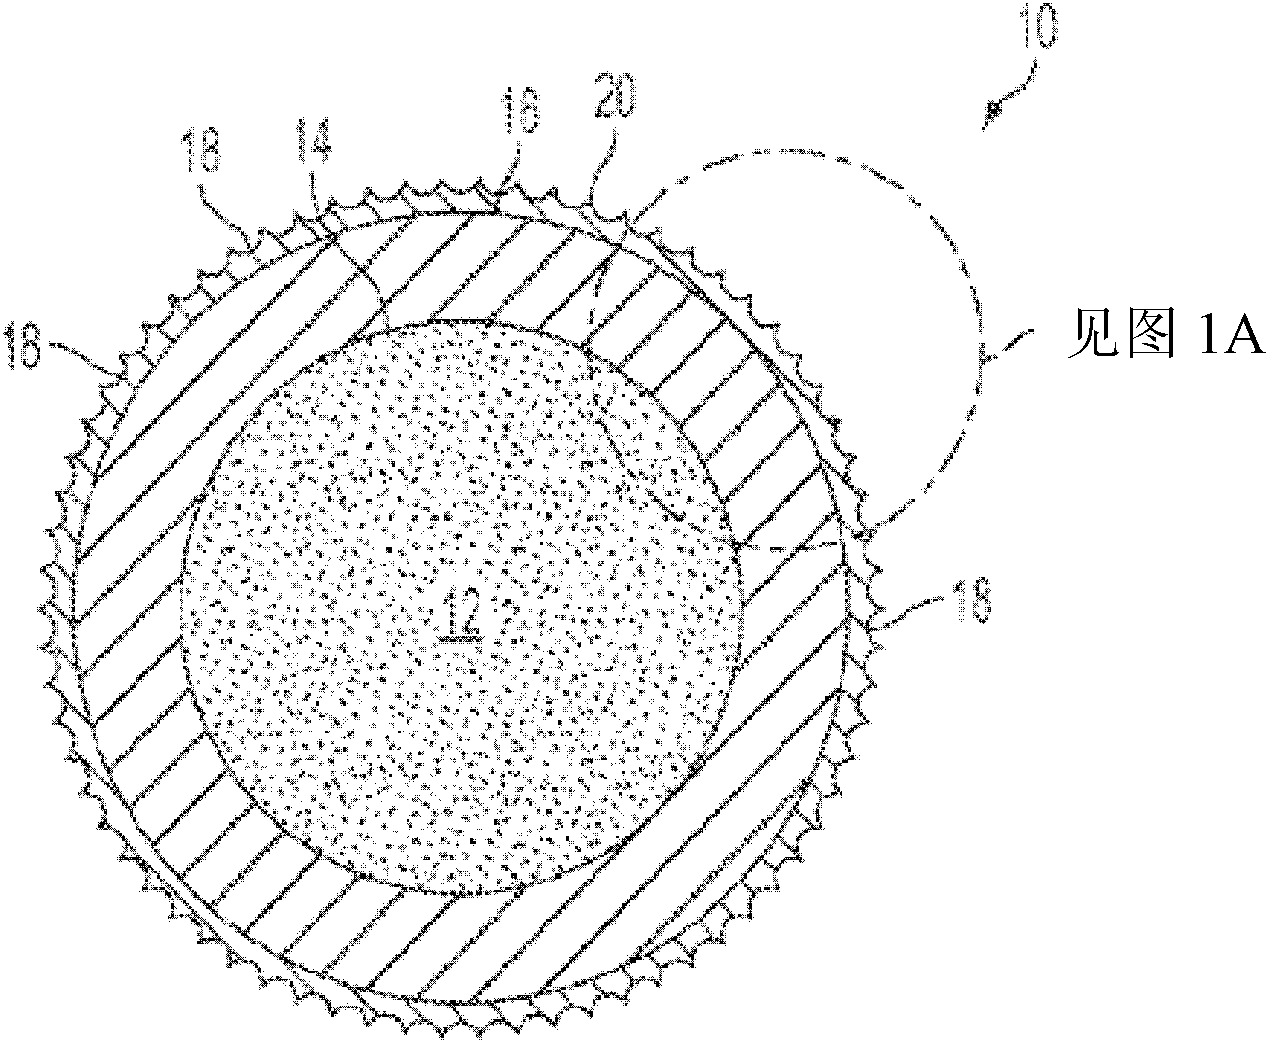 Method and appratus for applying a topcoat to a golf ball surface